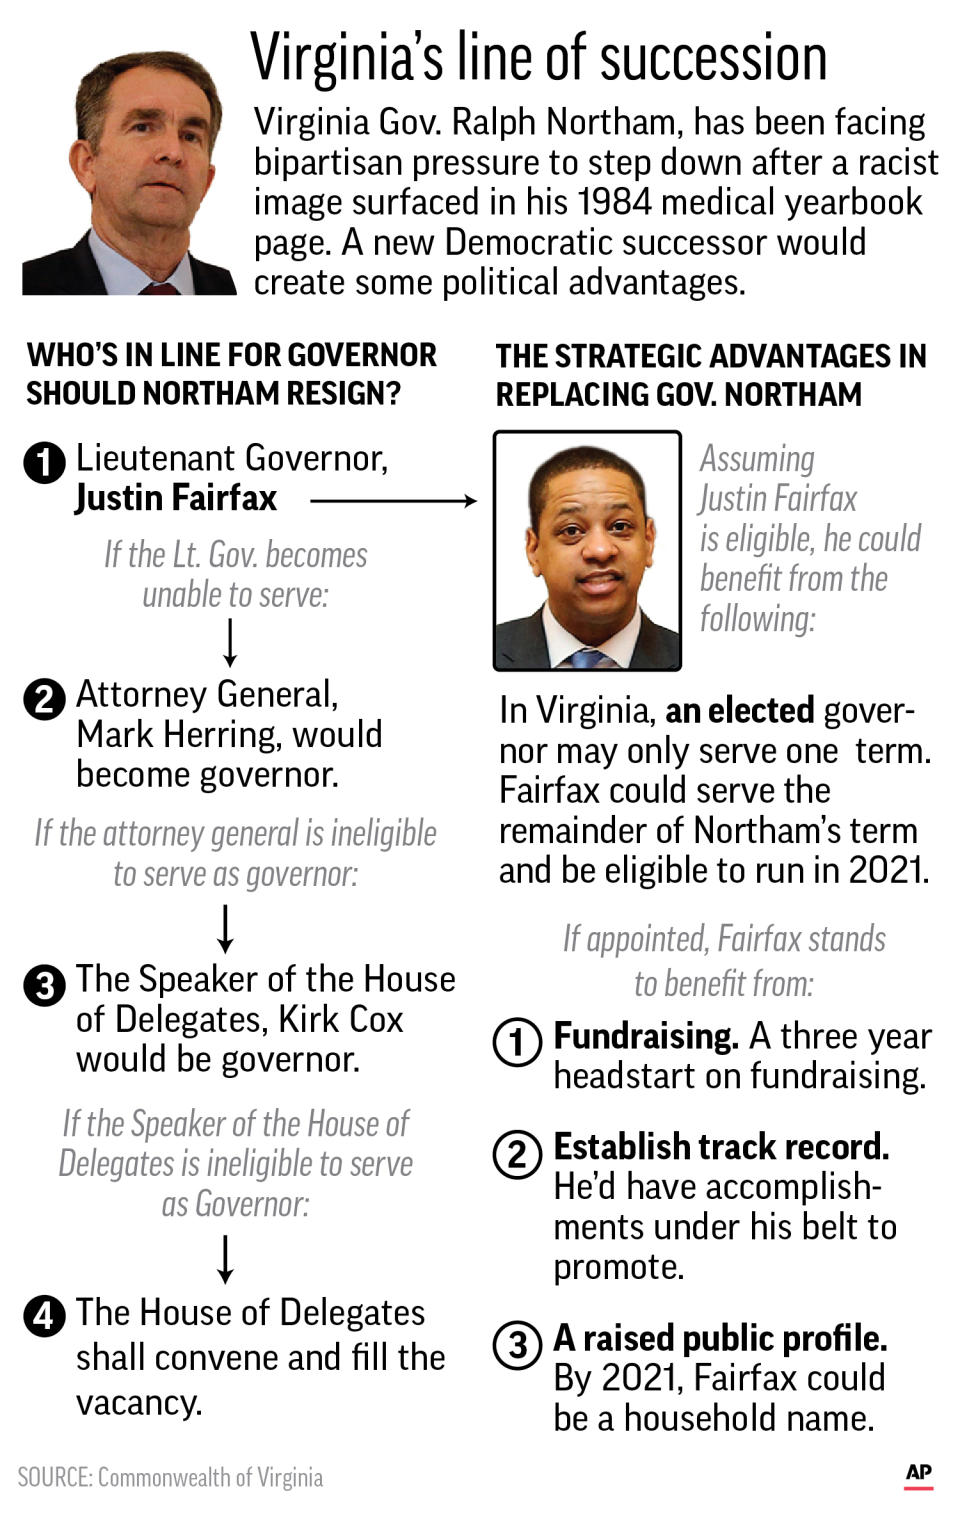 Graphic highlights the line of succession for Virginia governor and looks at strategic advantages democrats could benefit from; 2c x 5 1/4 inches; 96.3 mm x 133 mm;